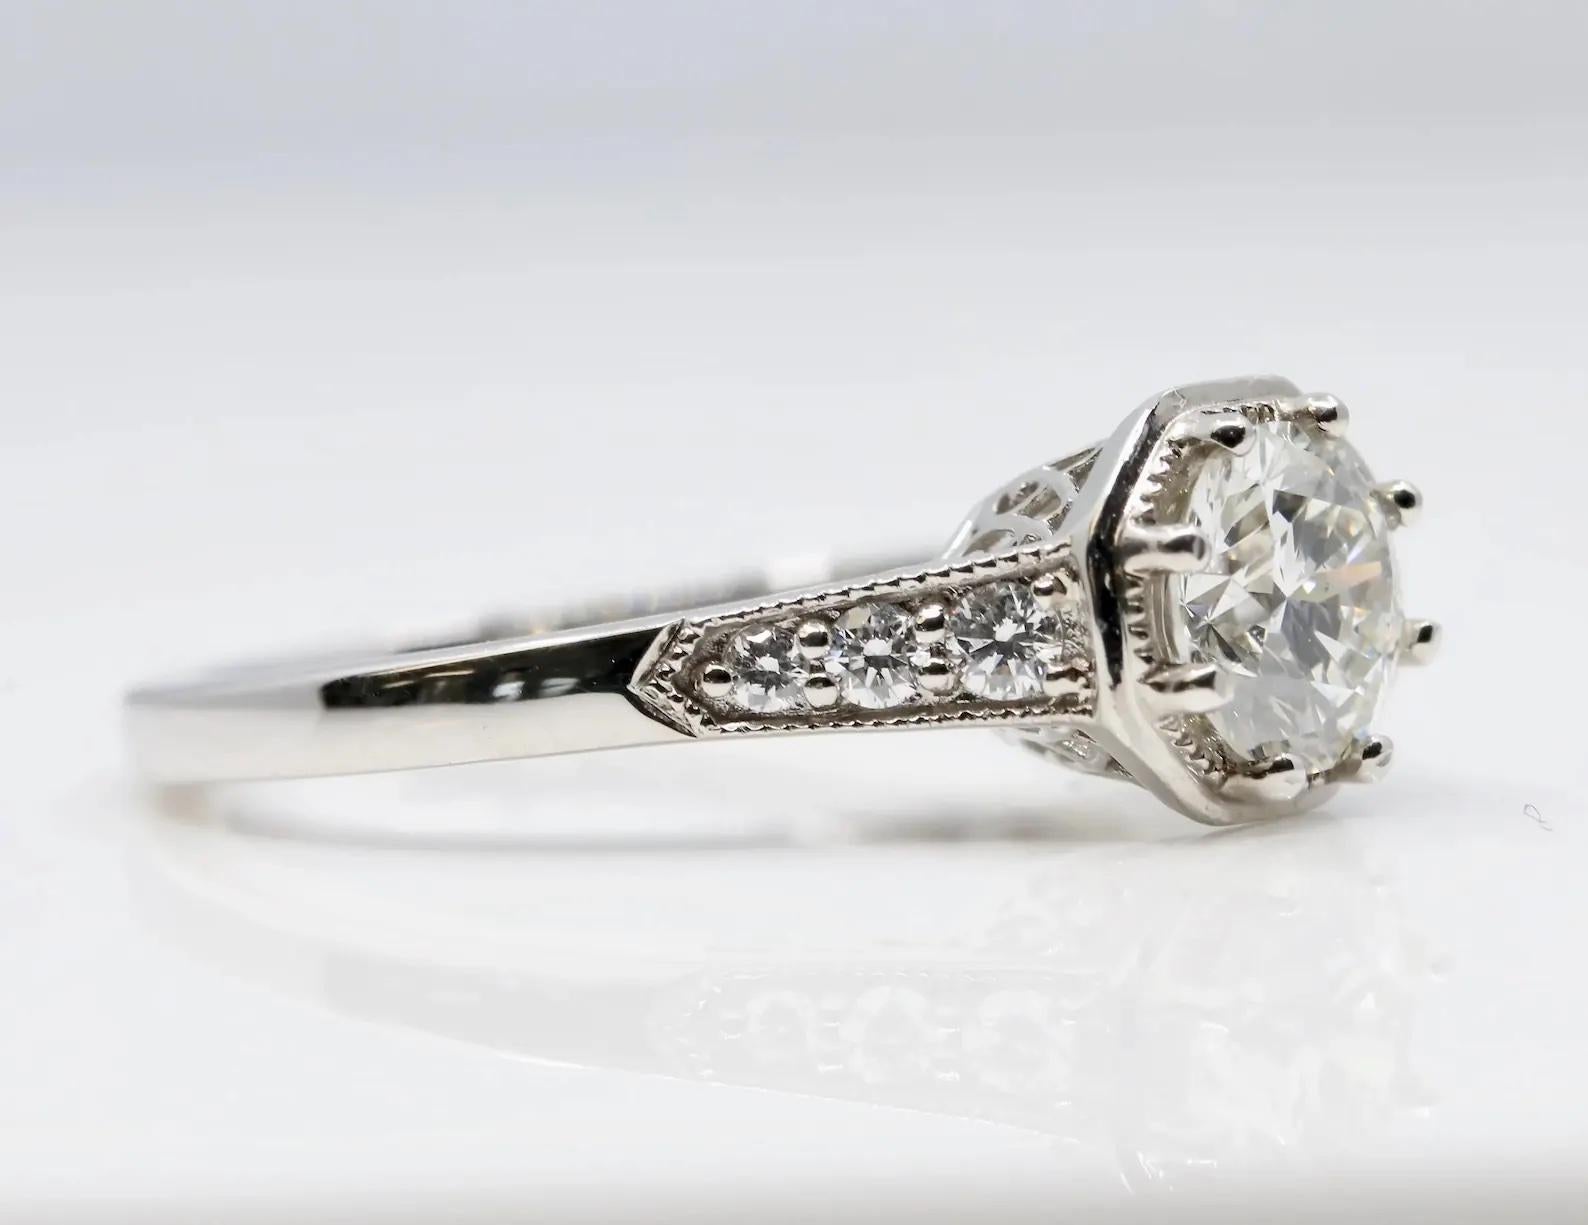 A vintage Art Deco style 0.70 carat diamond engagement ring in 14 karat white gold. Centering this ring is a 0.70 carat H color, VS2 clarity round brilliant cut diamond framed by six accenting pave set diamonds weighing a combined 0.15 carats.

In